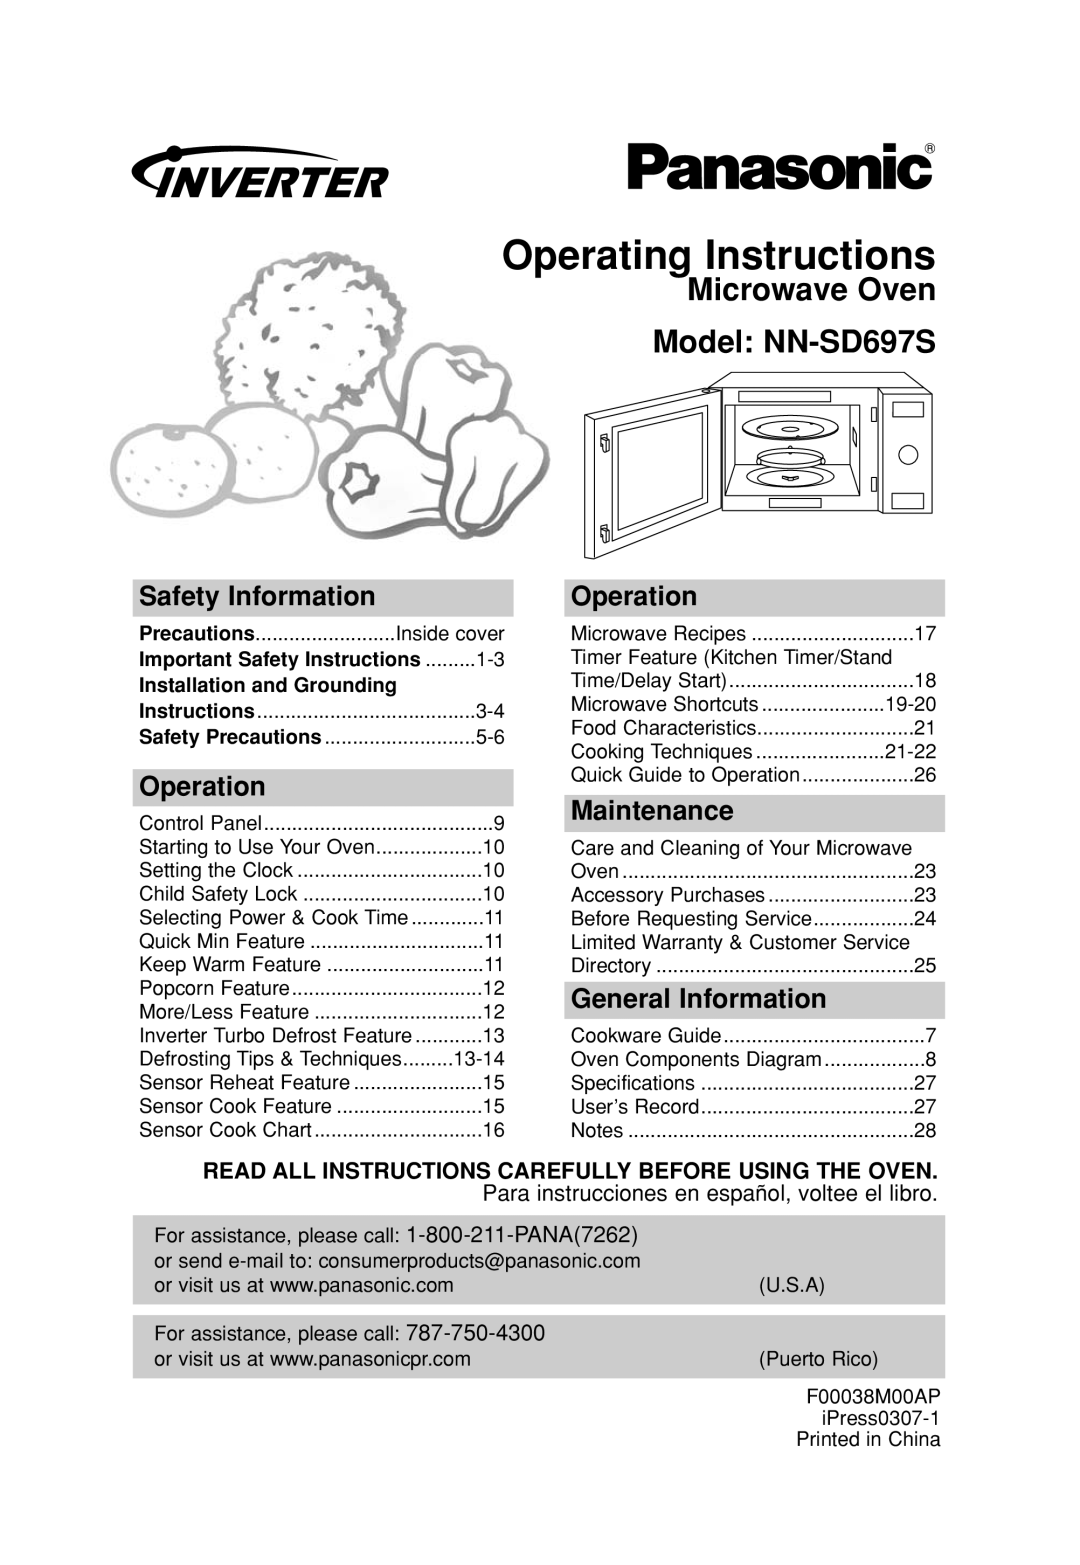 Panasonic operating instructions Operating Instructions, Microwave Oven Model NN-SD697S, Safety Information, Operation 